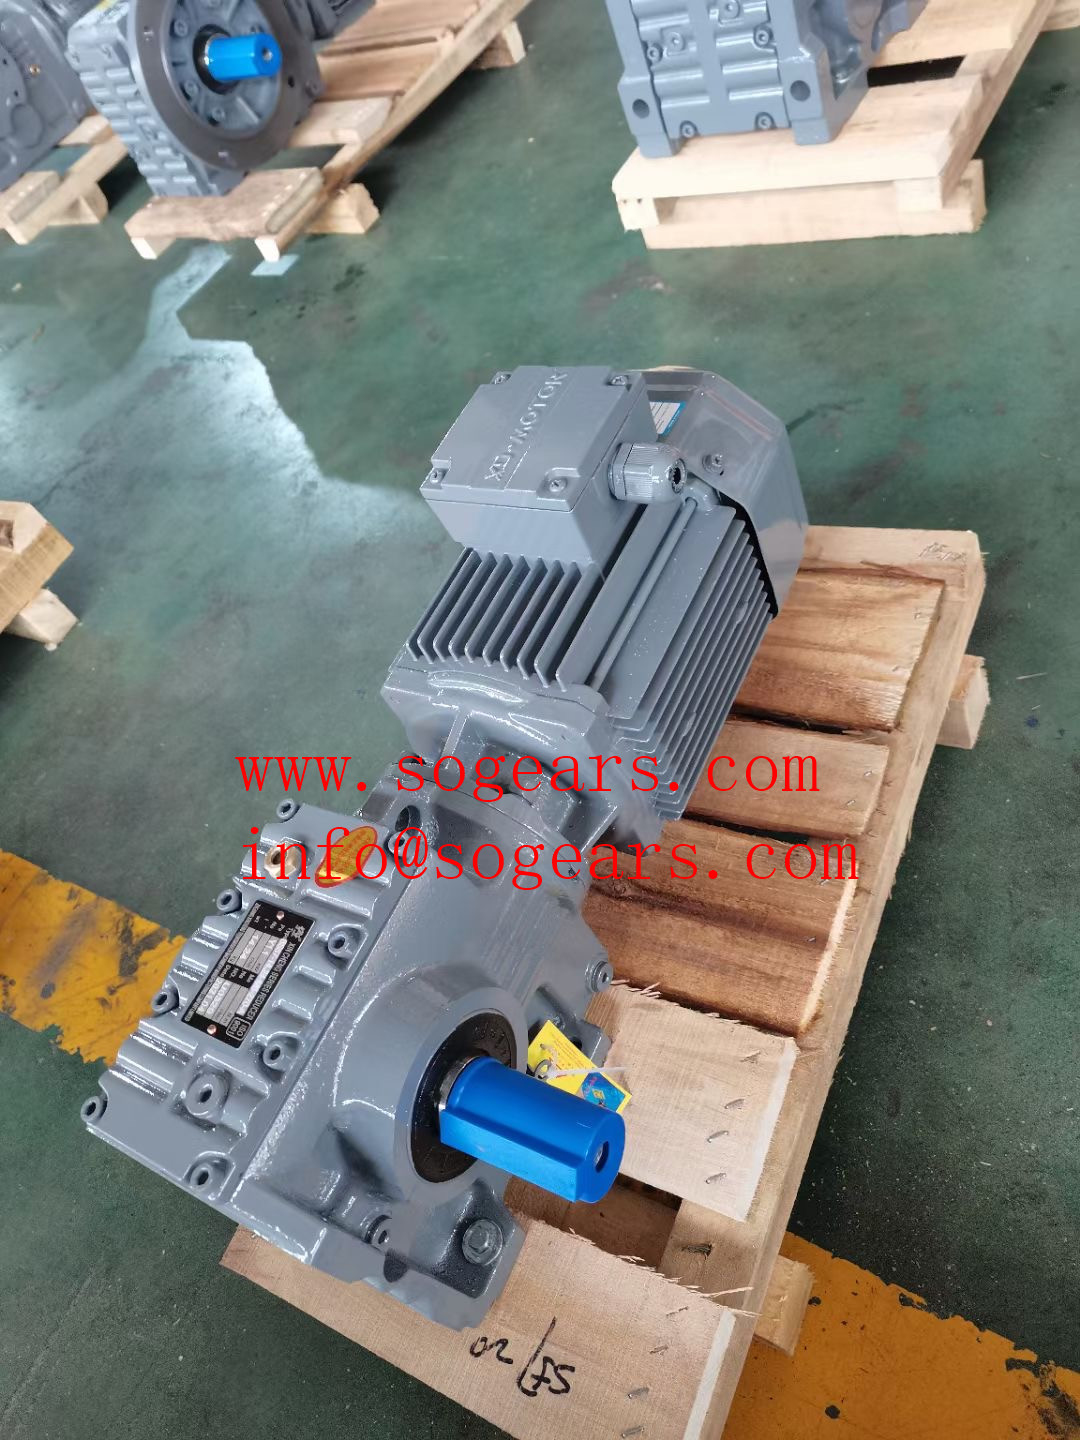 i-parallel shaft helical geared motor